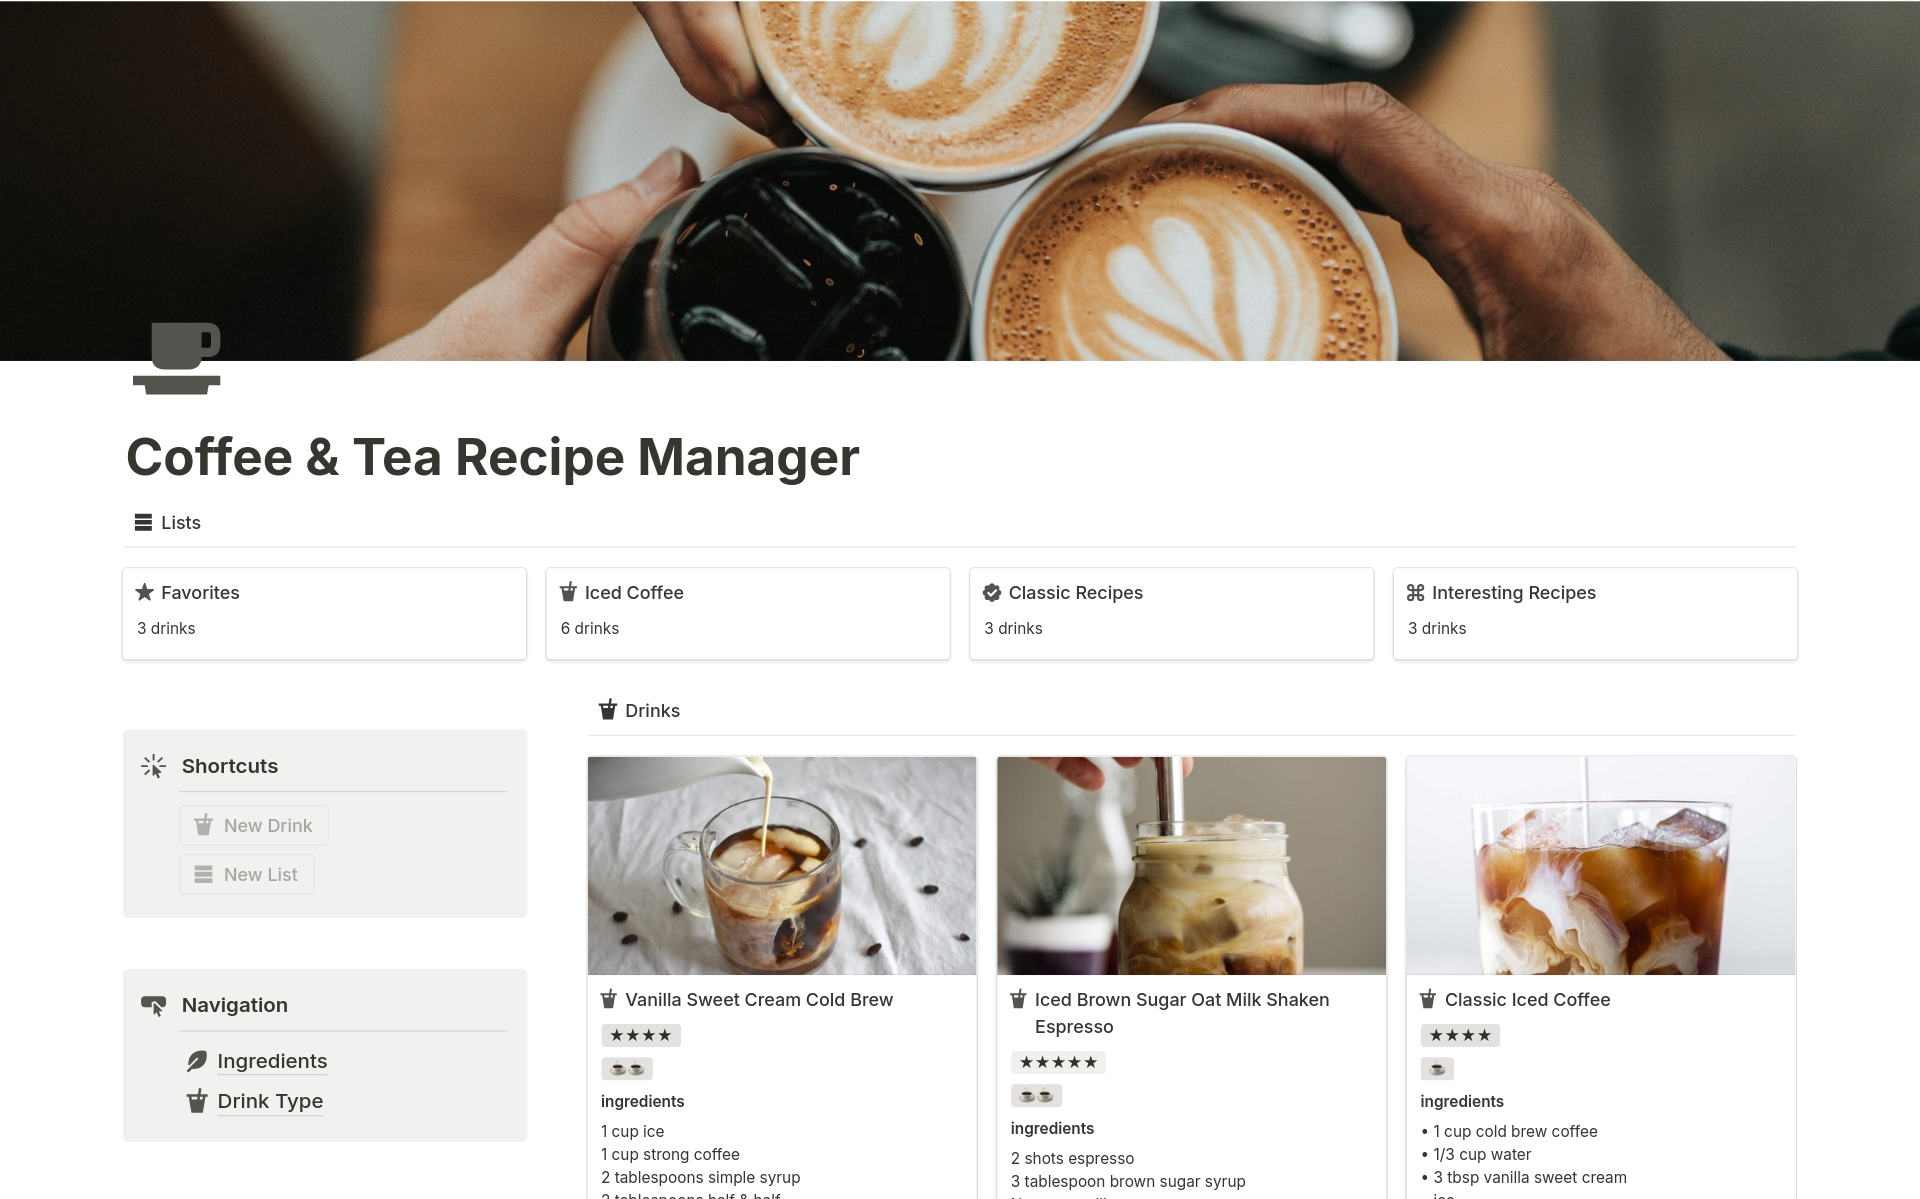 Manage your favorite coffee and tea recipes in one database.